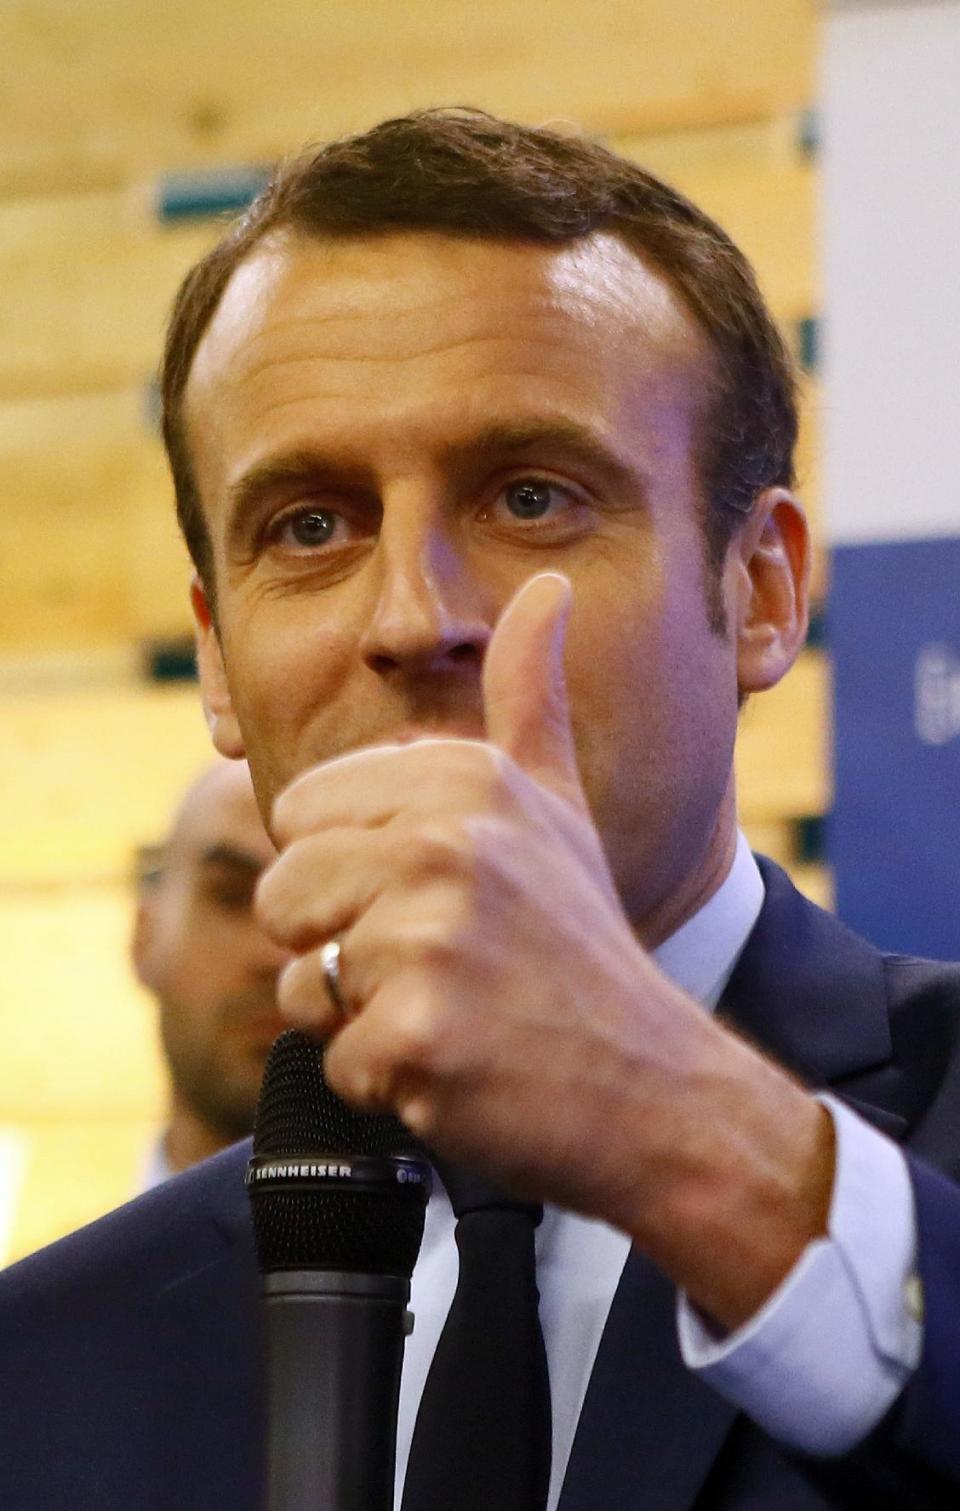 Presidential candidate Emmanuel Macron thumbs up at the Entrepreneurs Fair in Paris, Thursday, Feb. 2, 2017. With French President Francois Hollande having abandoned hopes of a second five-year term and conservative candidate Francois Fillon weakened, National Front leader Marine Le Pen and independent maverick candidate Macron are making hay. (AP Photo/Francois Mori)